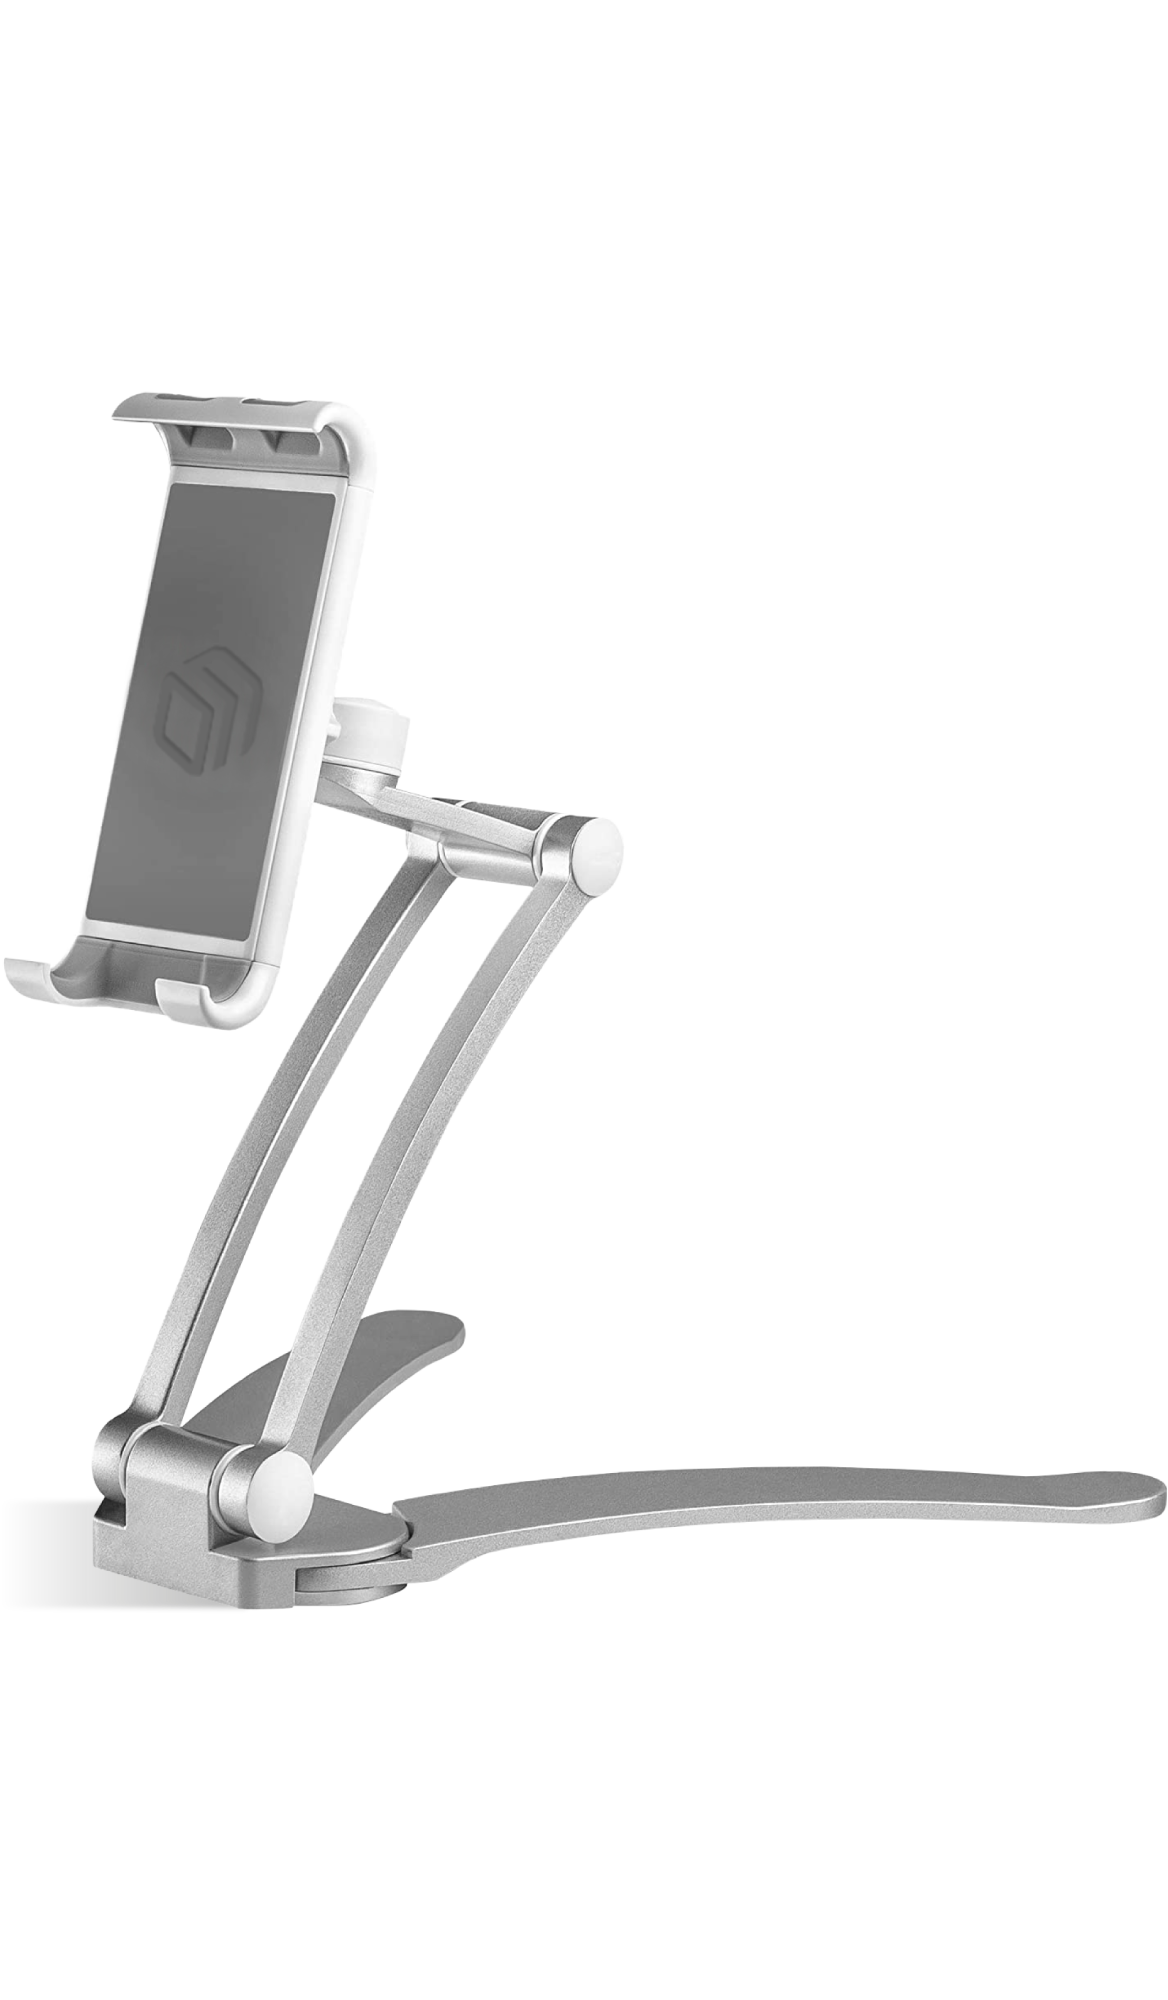 Cell Phone Stand Tablet Holder for 4.7”-11" Screens up to 2.4 lbs Adjustable ONKRON DS-01, Silver